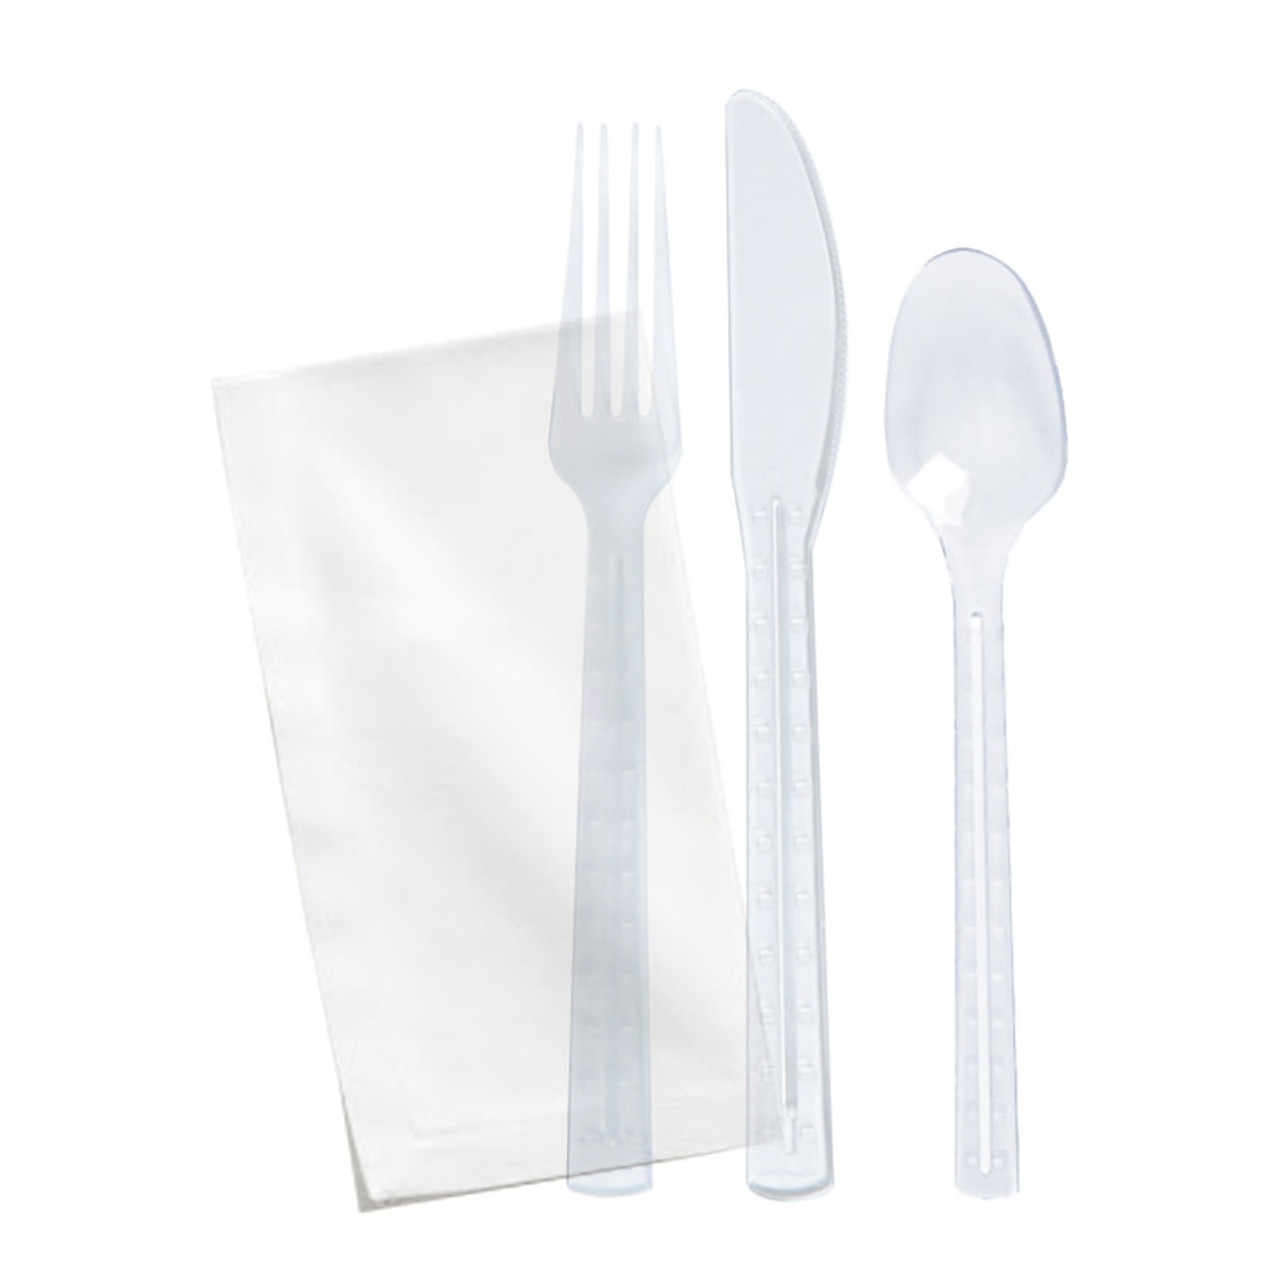 Choice Medium Weight Black Wrapped Plastic Cutlery Set with Napkin and Salt  and Pepper Packets - 250/Case